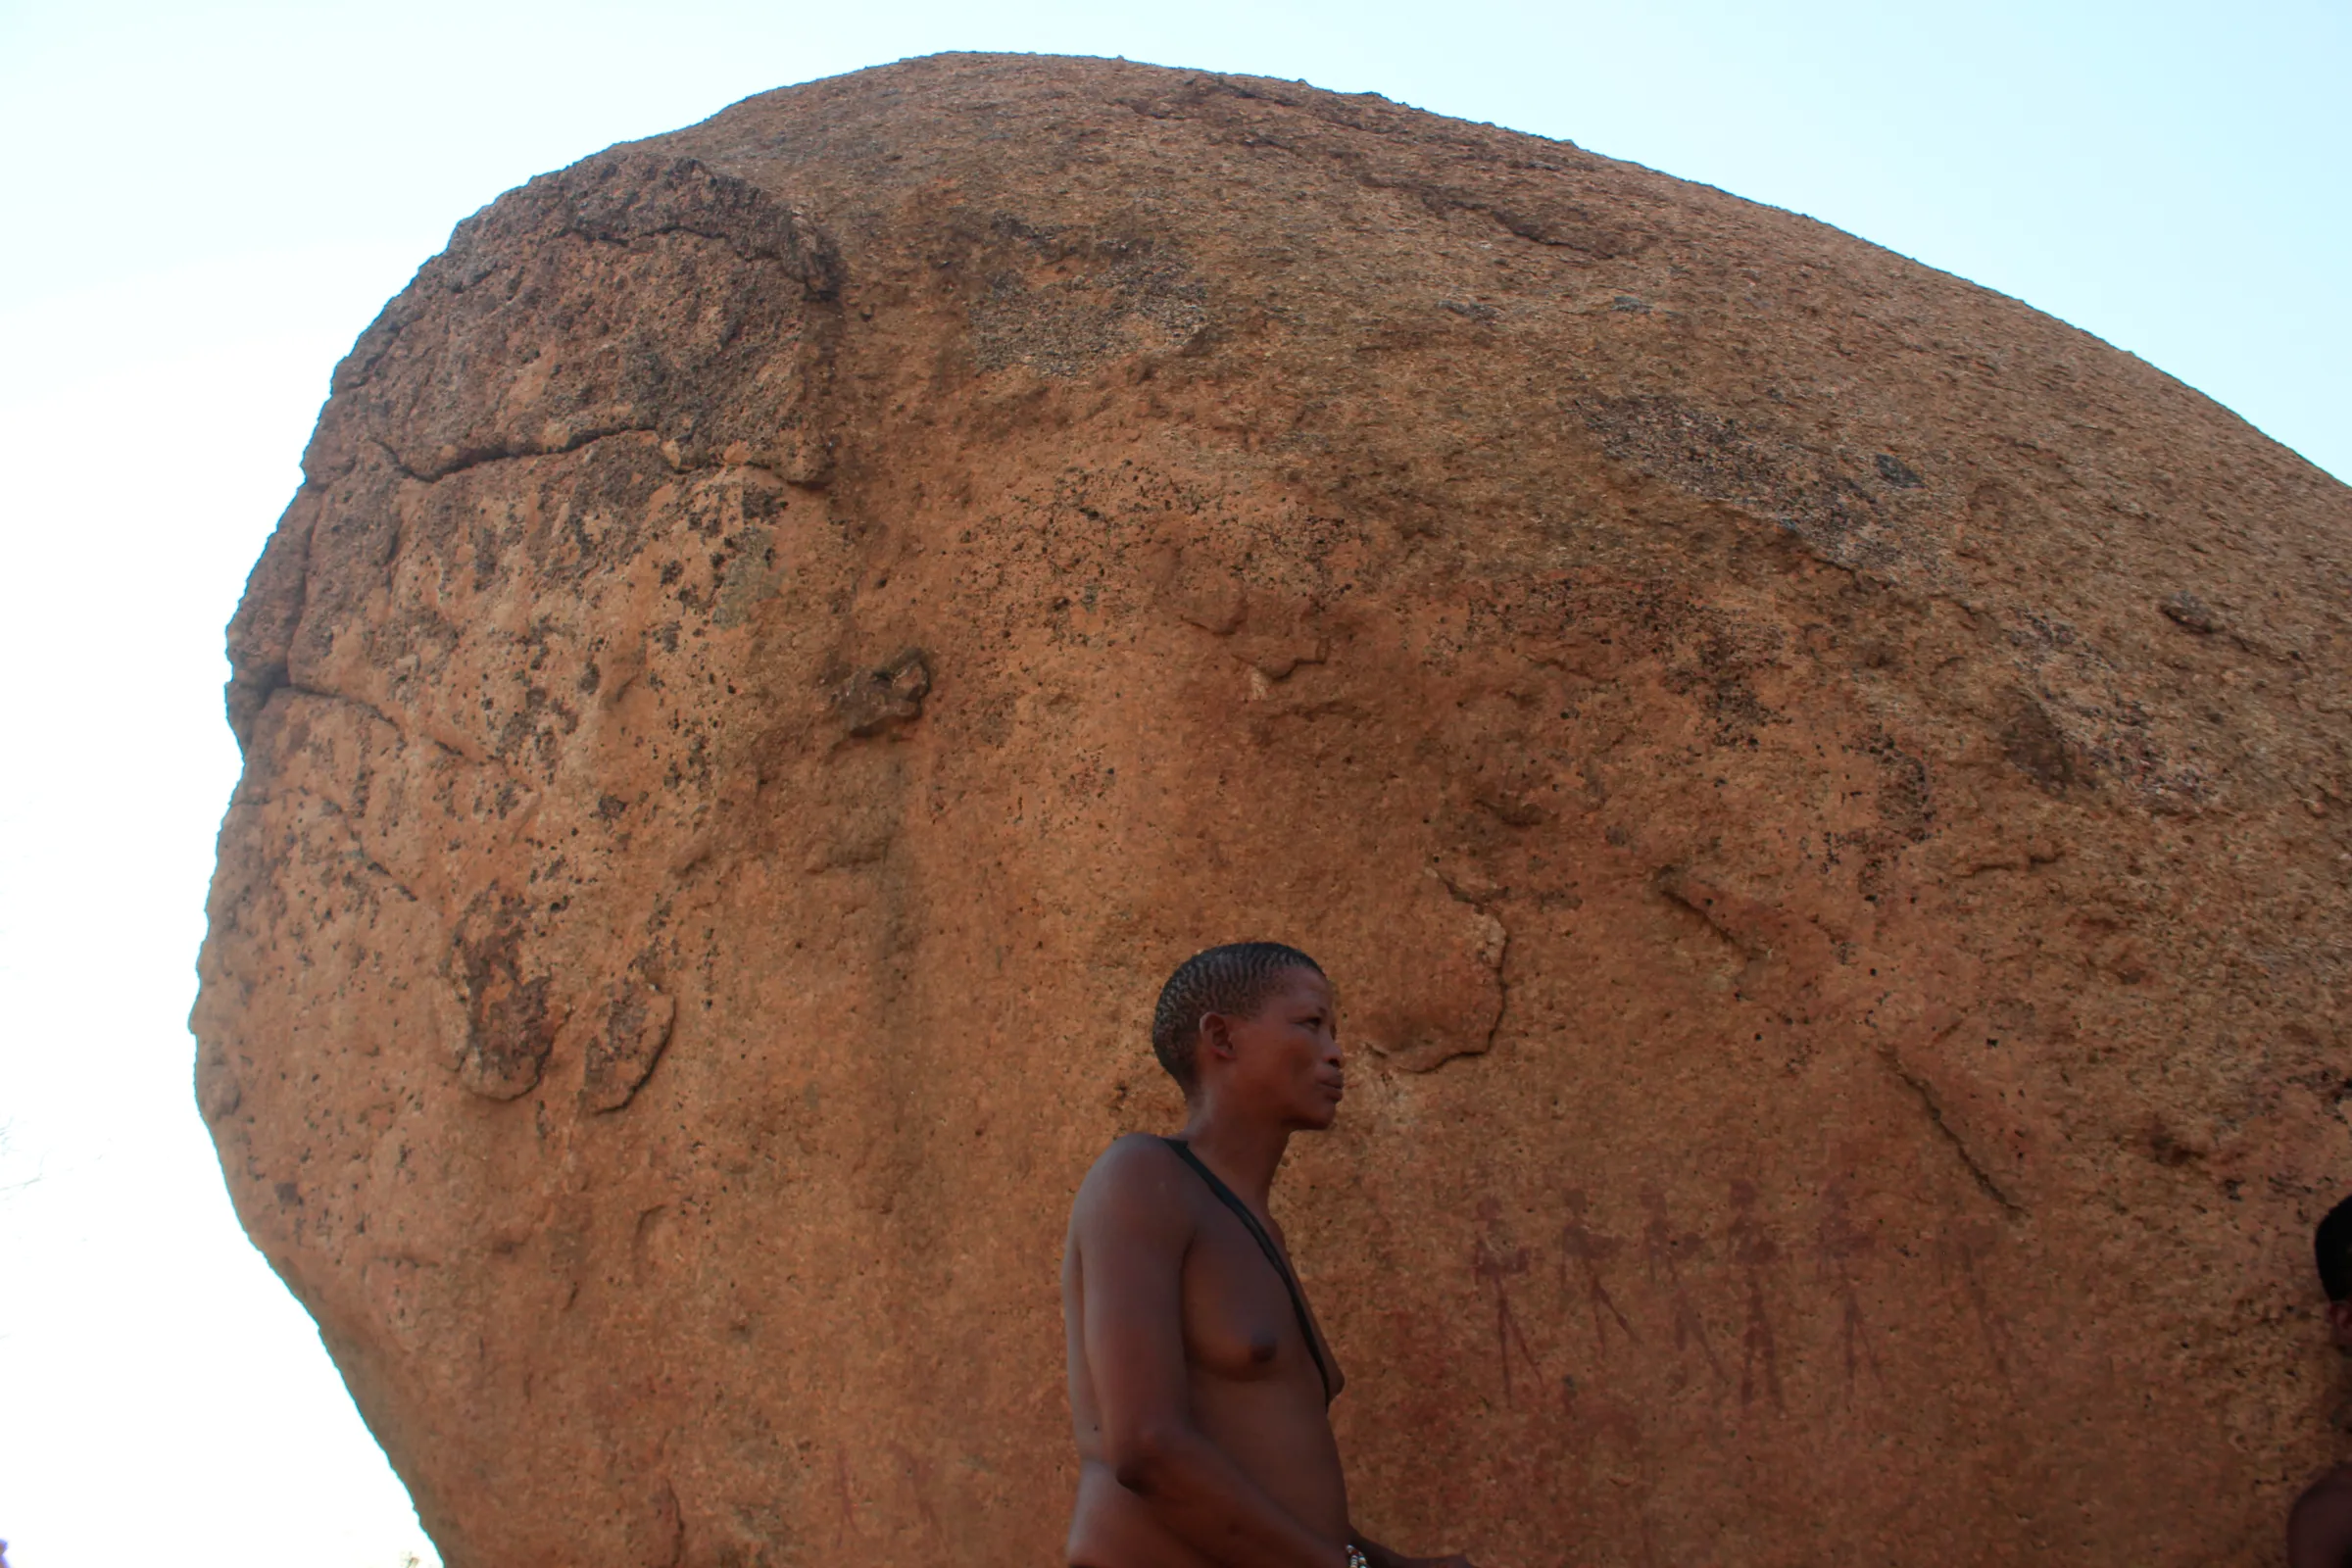 Johannes Ikun Nani stands in front of a boulder displaying ancient San rock at the Omandumba farm in the central region of Namibia, September 30, 2022